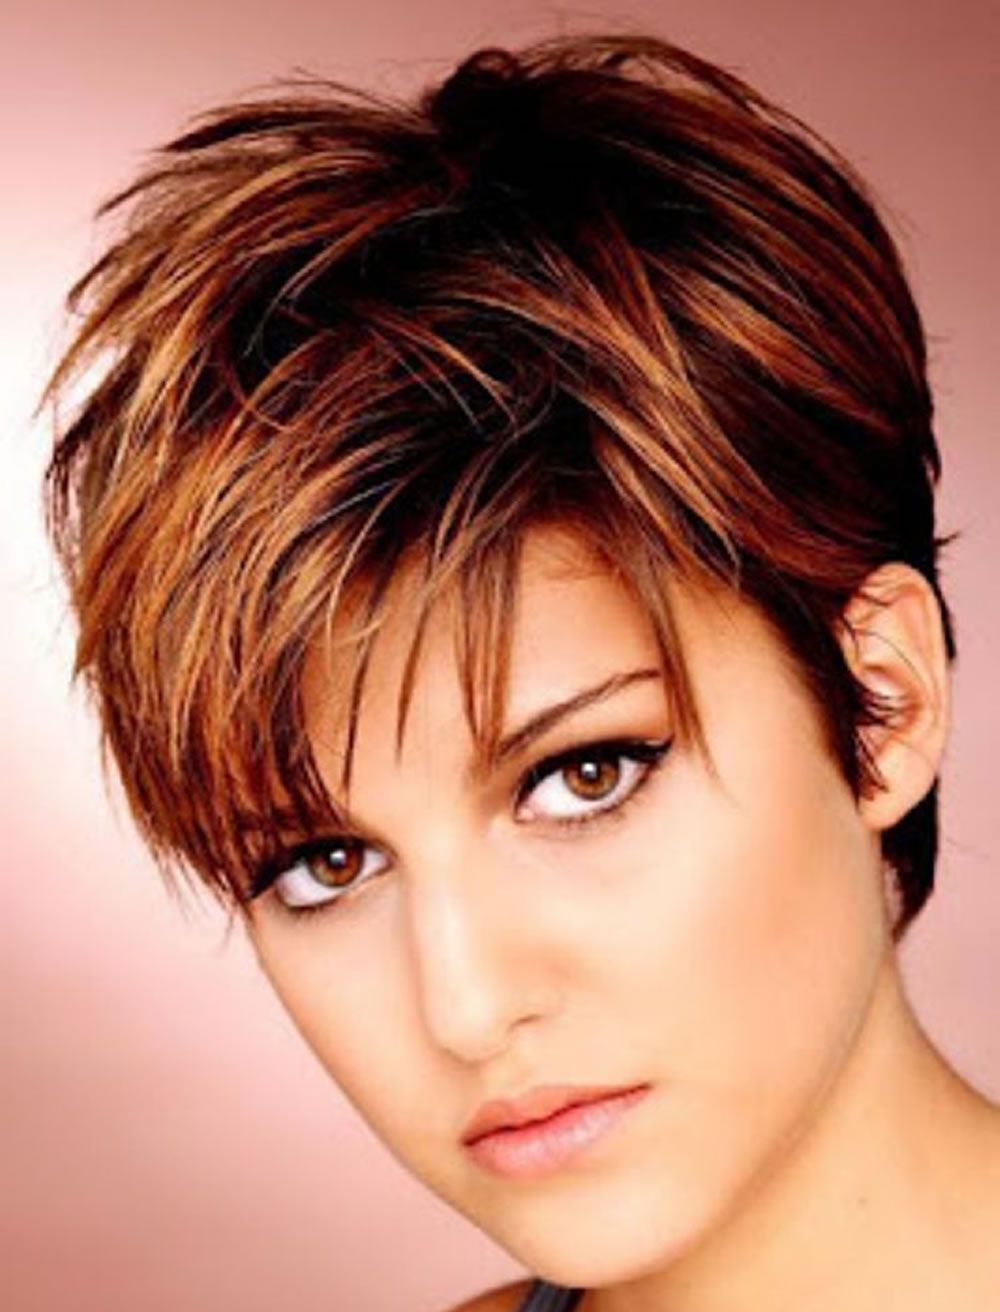 Short Haircuts For Round Face Thin Hair Ideas For 2018 – Hairstyles For Short Haircuts For Round Faces (View 17 of 25)